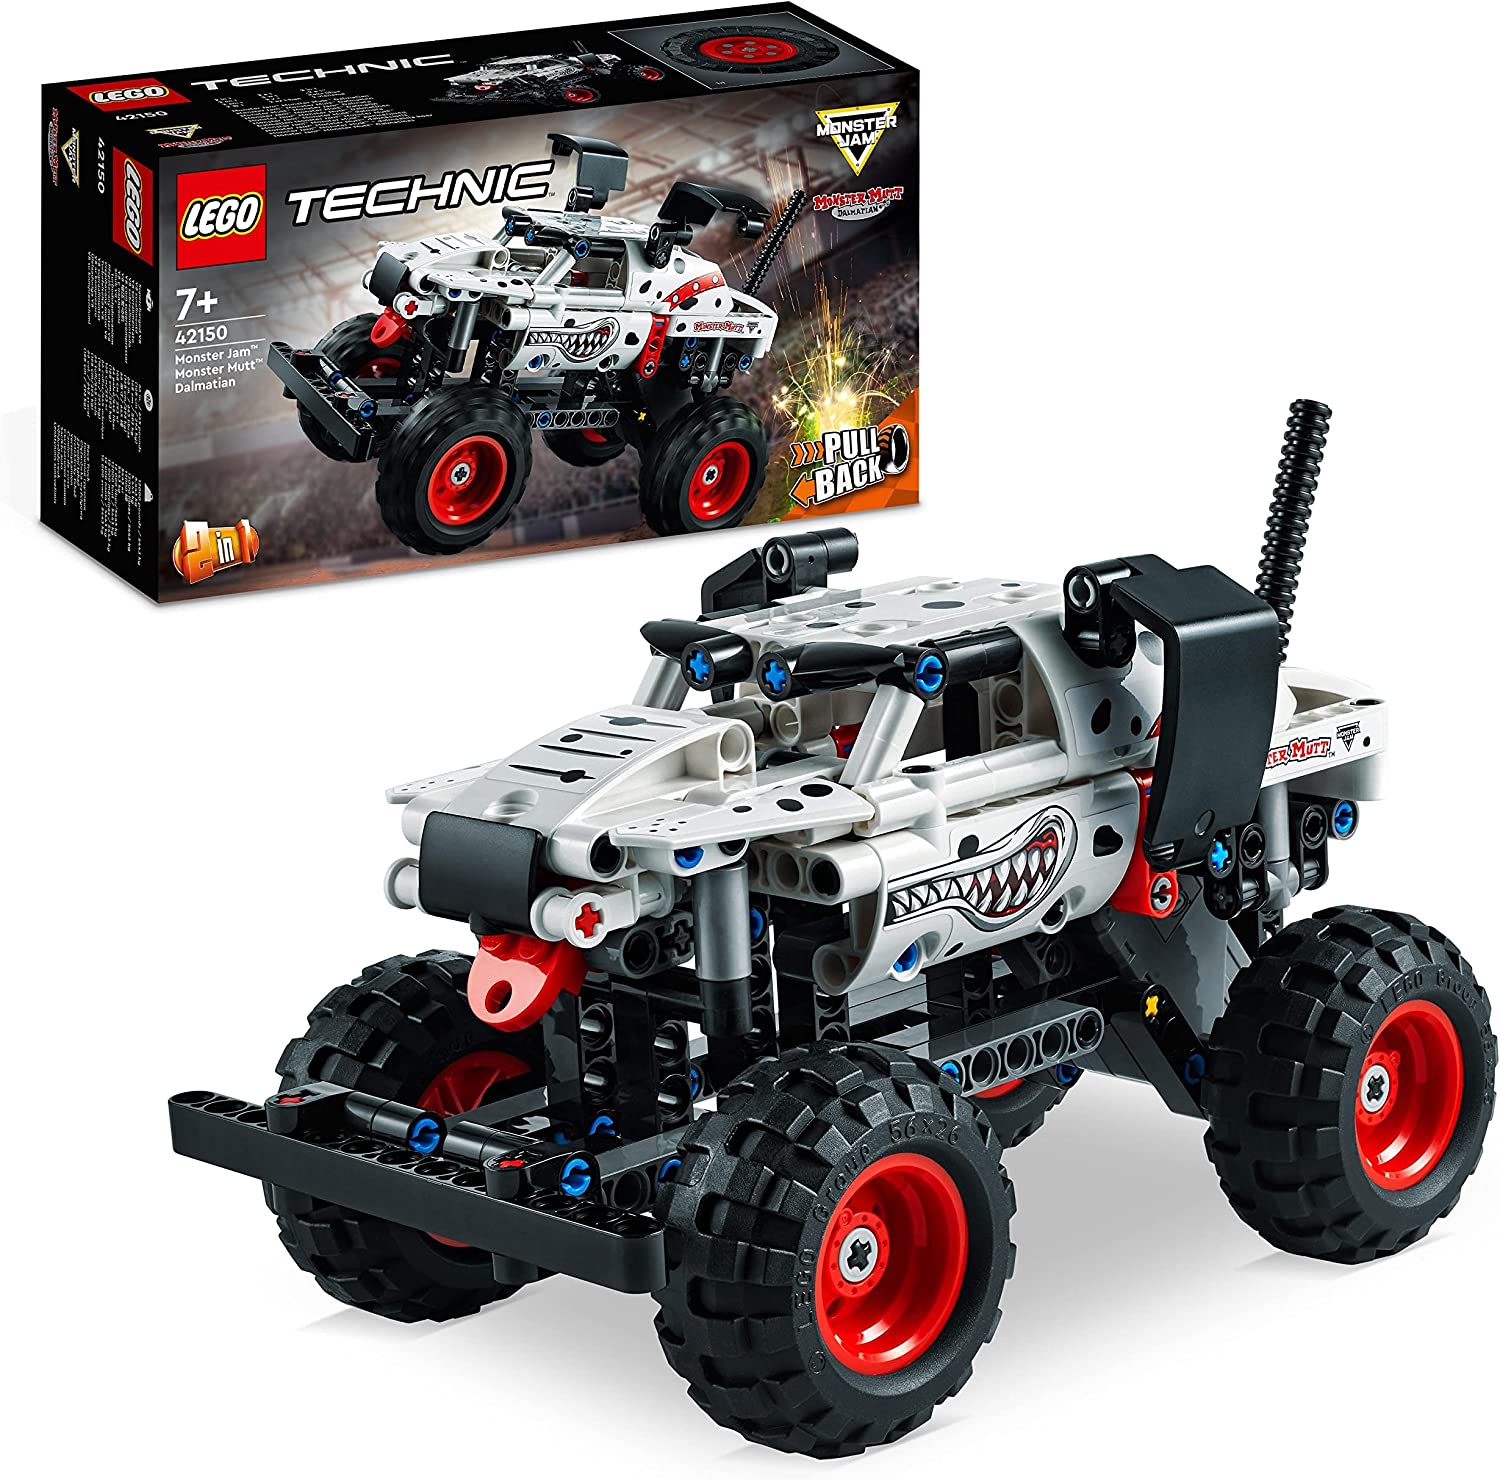 LEGO 42150 Technic Monster Jam Monster Mother Dalmatian Monster Truck Toy for Boys and Girls Racing Toy with Pull-Back Motor